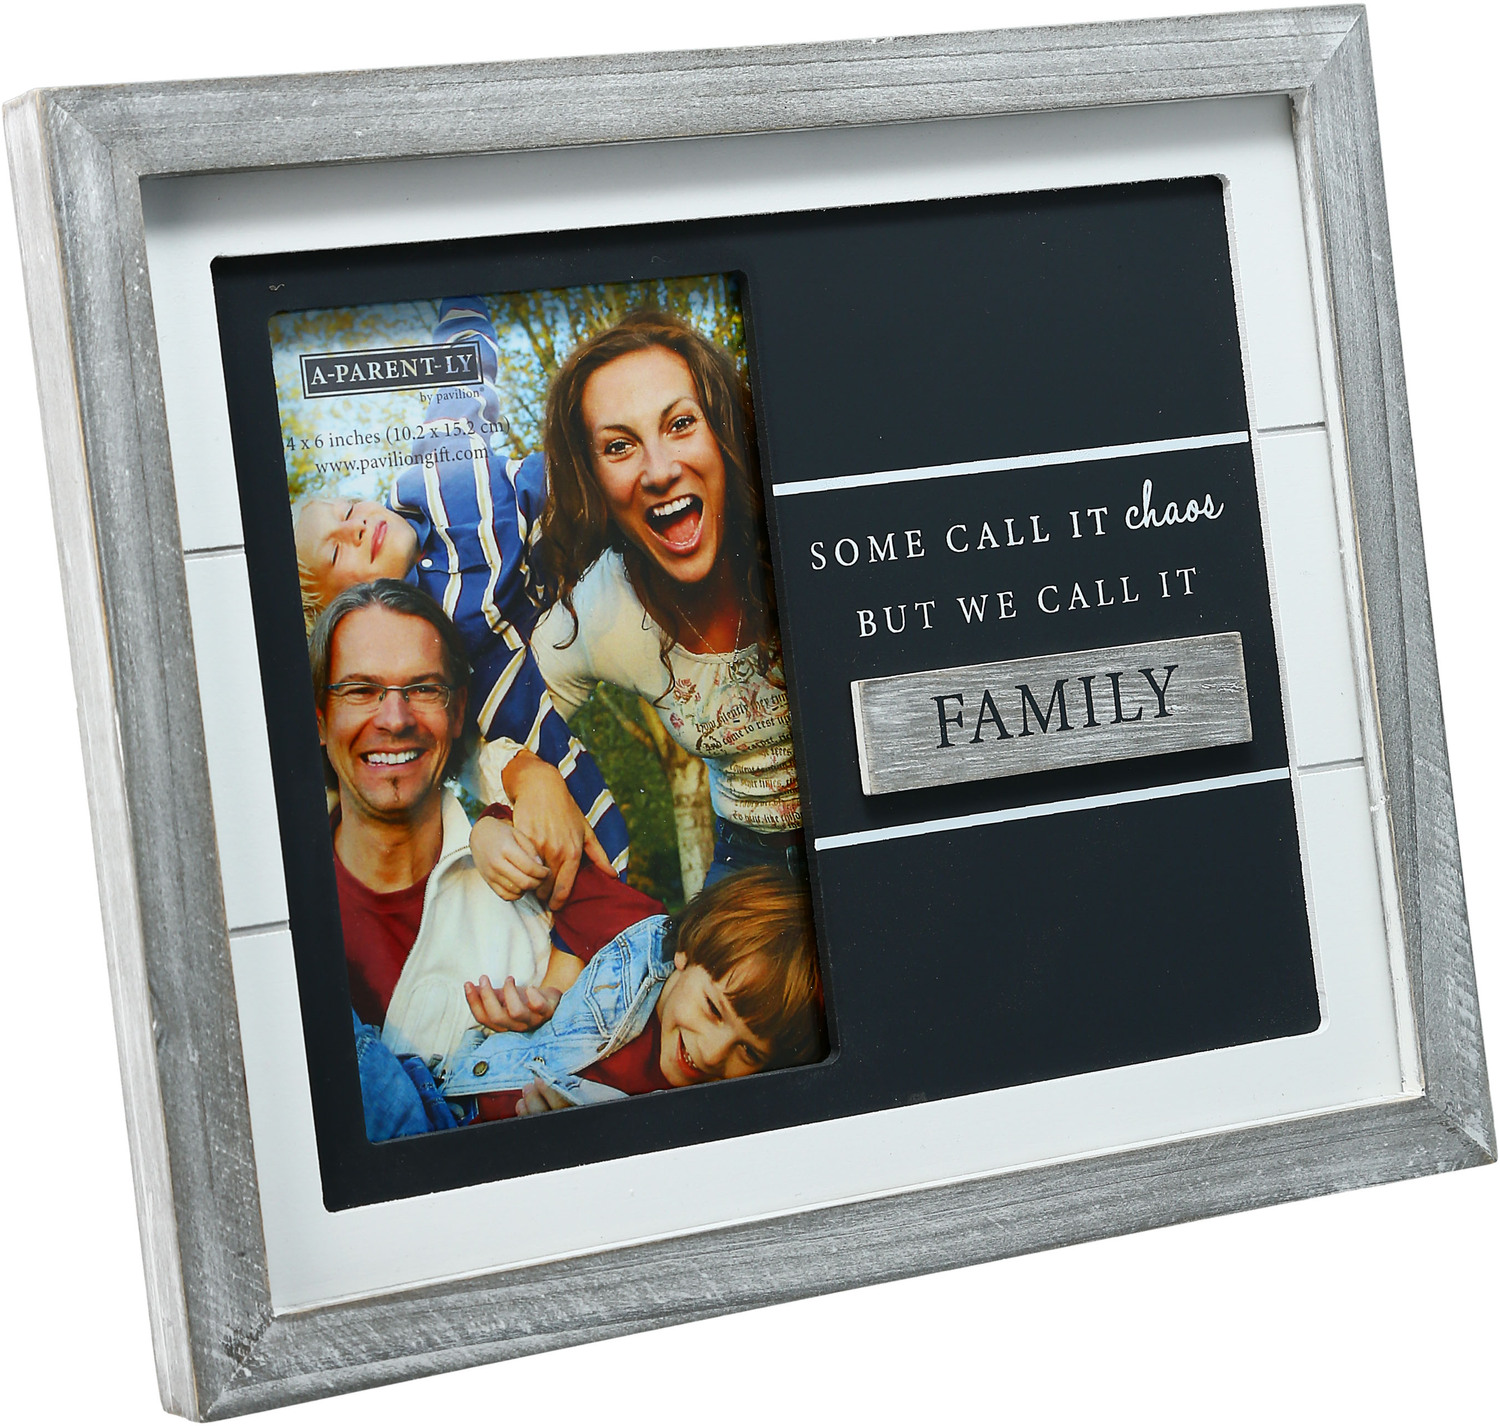 Family by A-Parent-ly - Family - 9.75" x 8.25" Frame (Holds 4" x 6" Photo)